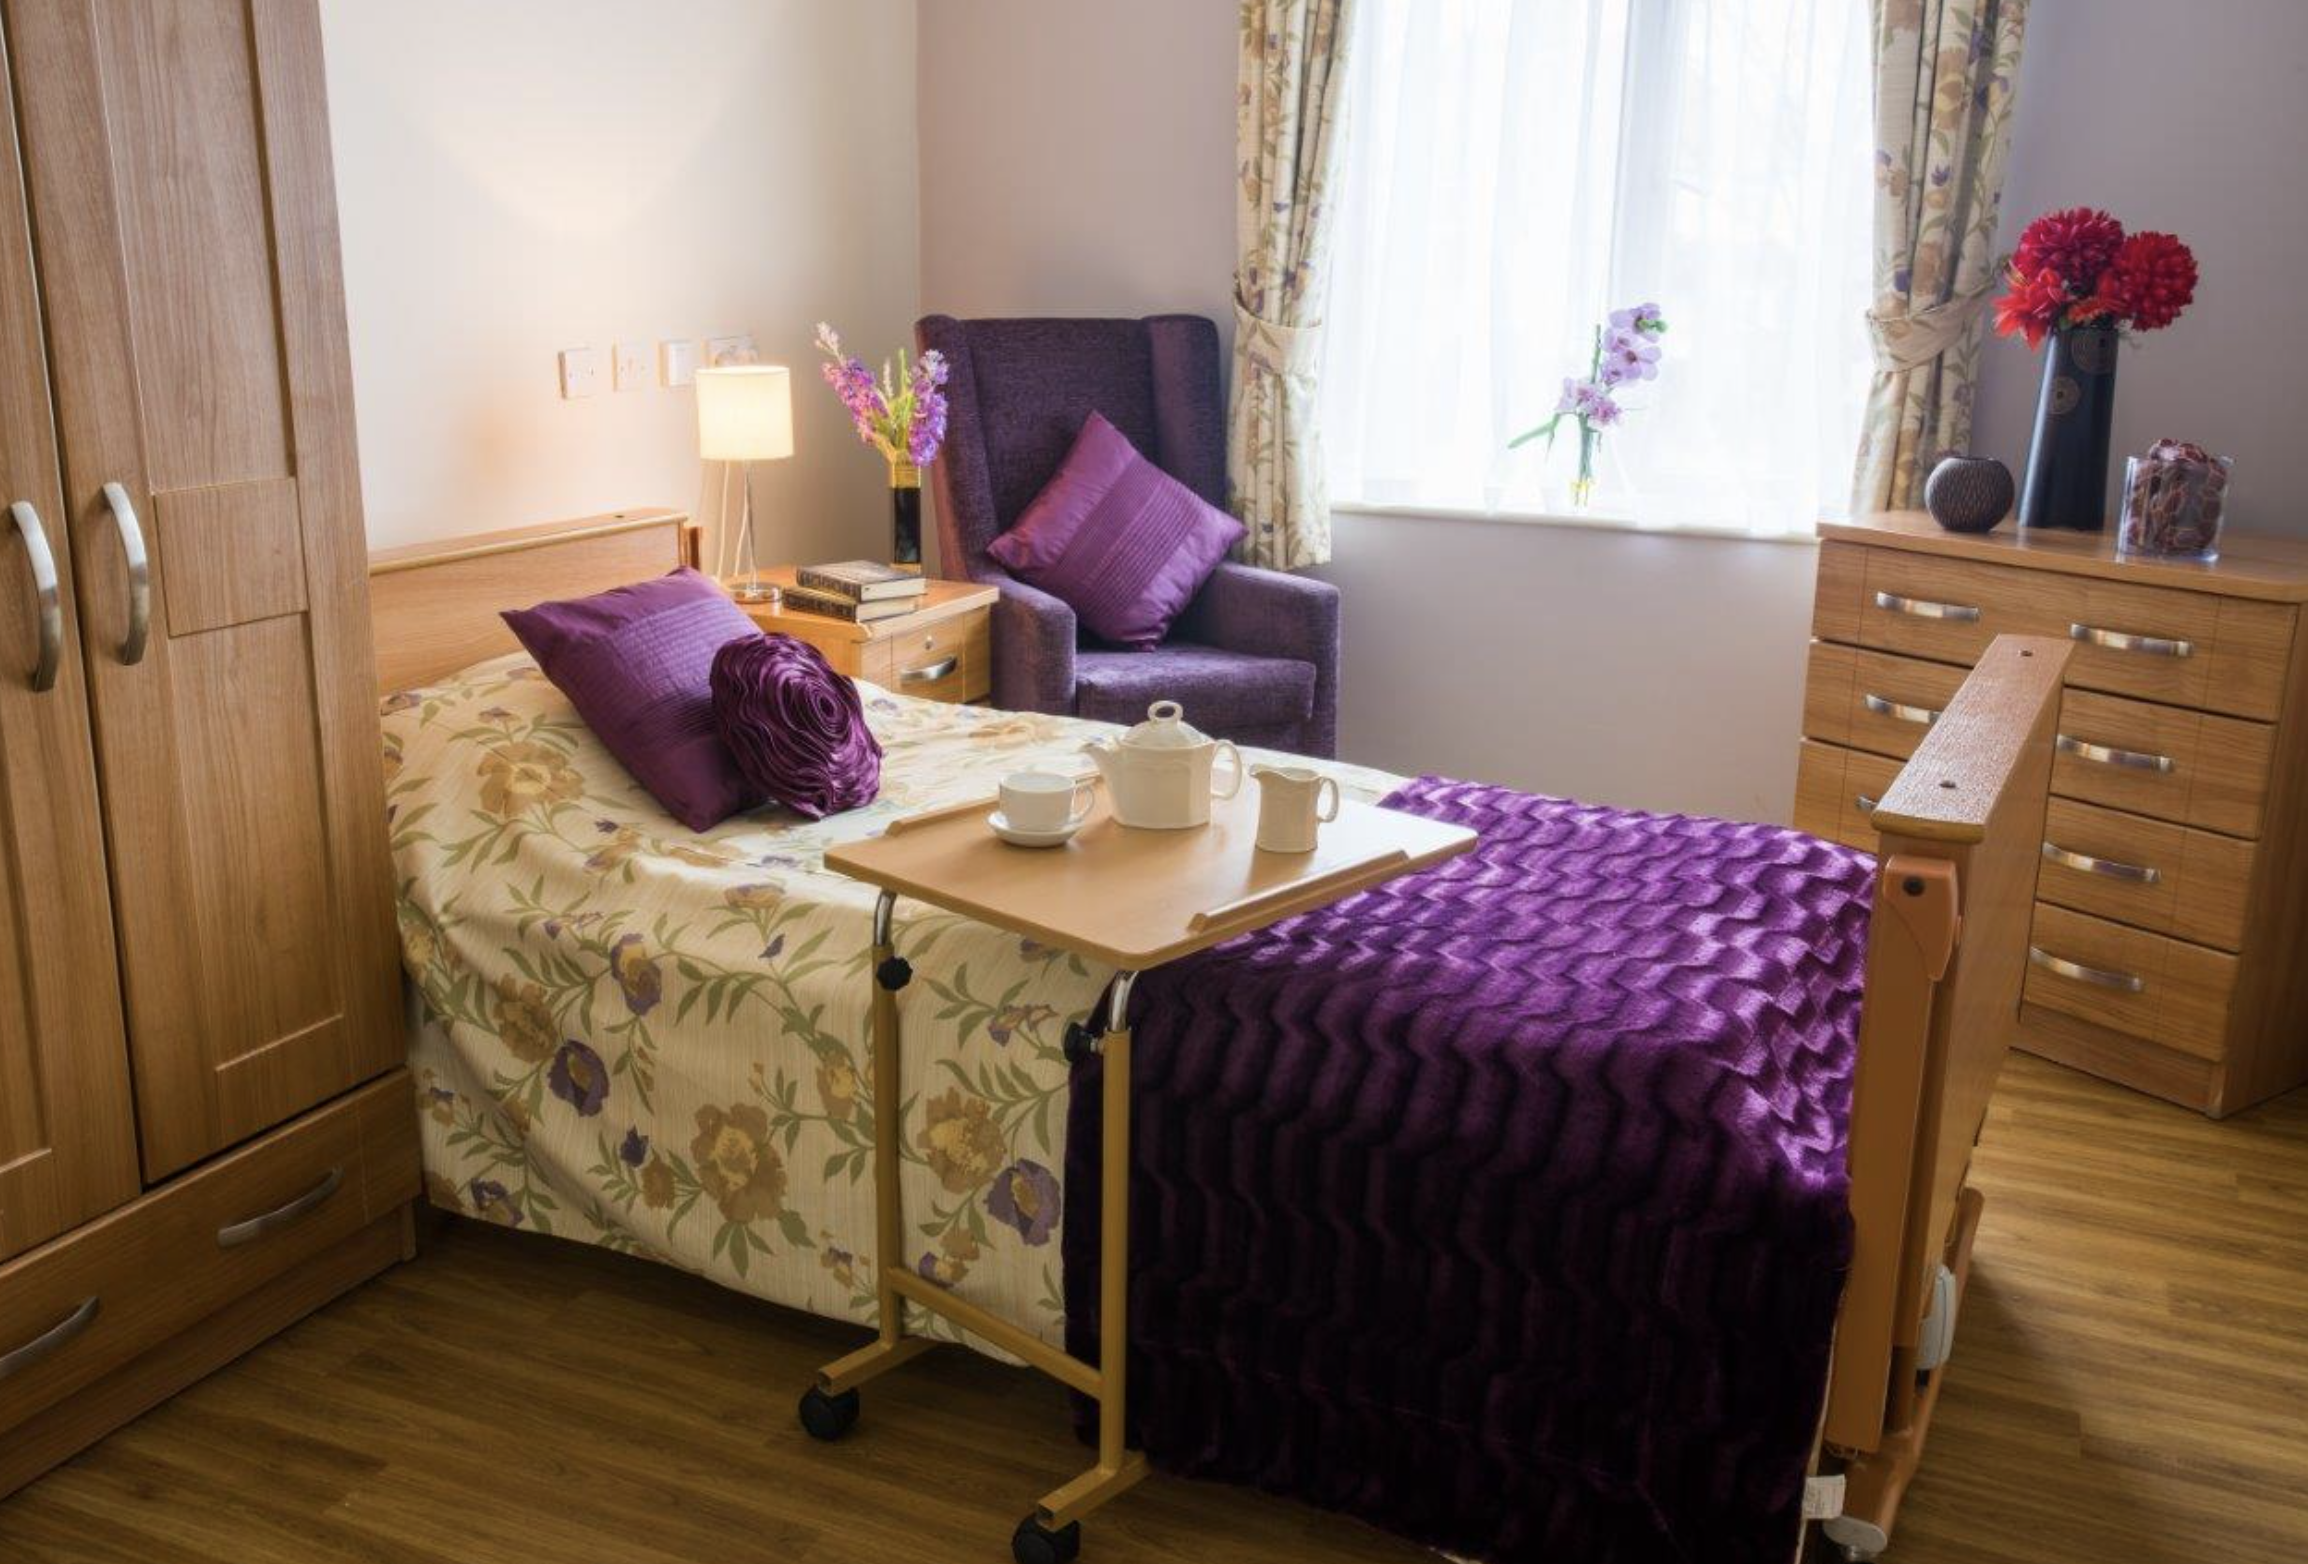 Bedroom of Middlesex Manor care home in Wembley, London